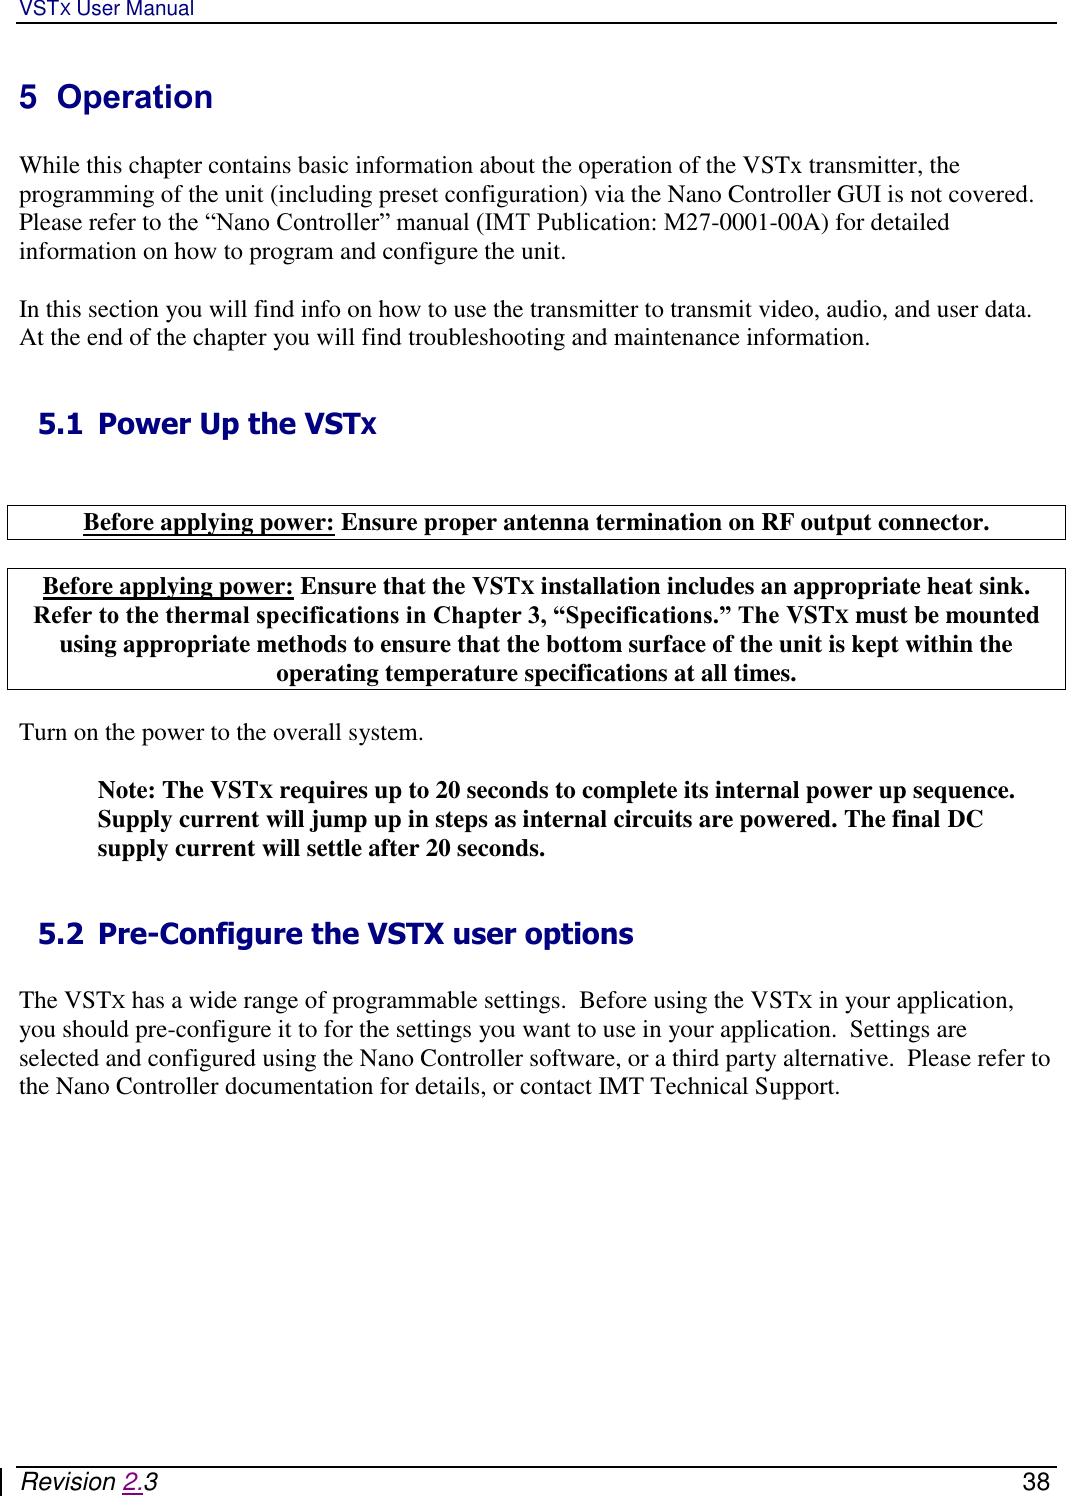 VSTX User Manual   Revision 2.3    38 5  Operation  While this chapter contains basic information about the operation of the VSTx transmitter, the programming of the unit (including preset configuration) via the Nano Controller GUI is not covered.  Please refer to the “Nano Controller” manual (IMT Publication: M27-0001-00A) for detailed information on how to program and configure the unit.  In this section you will find info on how to use the transmitter to transmit video, audio, and user data.  At the end of the chapter you will find troubleshooting and maintenance information.   5.1 Power Up the VSTX    Before applying power: Ensure proper antenna termination on RF output connector.  Before applying power: Ensure that the VSTX installation includes an appropriate heat sink. Refer to the thermal specifications in Chapter 3, “Specifications.” The VSTX must be mounted using appropriate methods to ensure that the bottom surface of the unit is kept within the operating temperature specifications at all times.  Turn on the power to the overall system.   Note: The VSTX requires up to 20 seconds to complete its internal power up sequence. Supply current will jump up in steps as internal circuits are powered. The final DC supply current will settle after 20 seconds.  5.2 Pre-Configure the VSTX user options  The VSTX has a wide range of programmable settings.  Before using the VSTX in your application, you should pre-configure it to for the settings you want to use in your application.  Settings are selected and configured using the Nano Controller software, or a third party alternative.  Please refer to the Nano Controller documentation for details, or contact IMT Technical Support.  